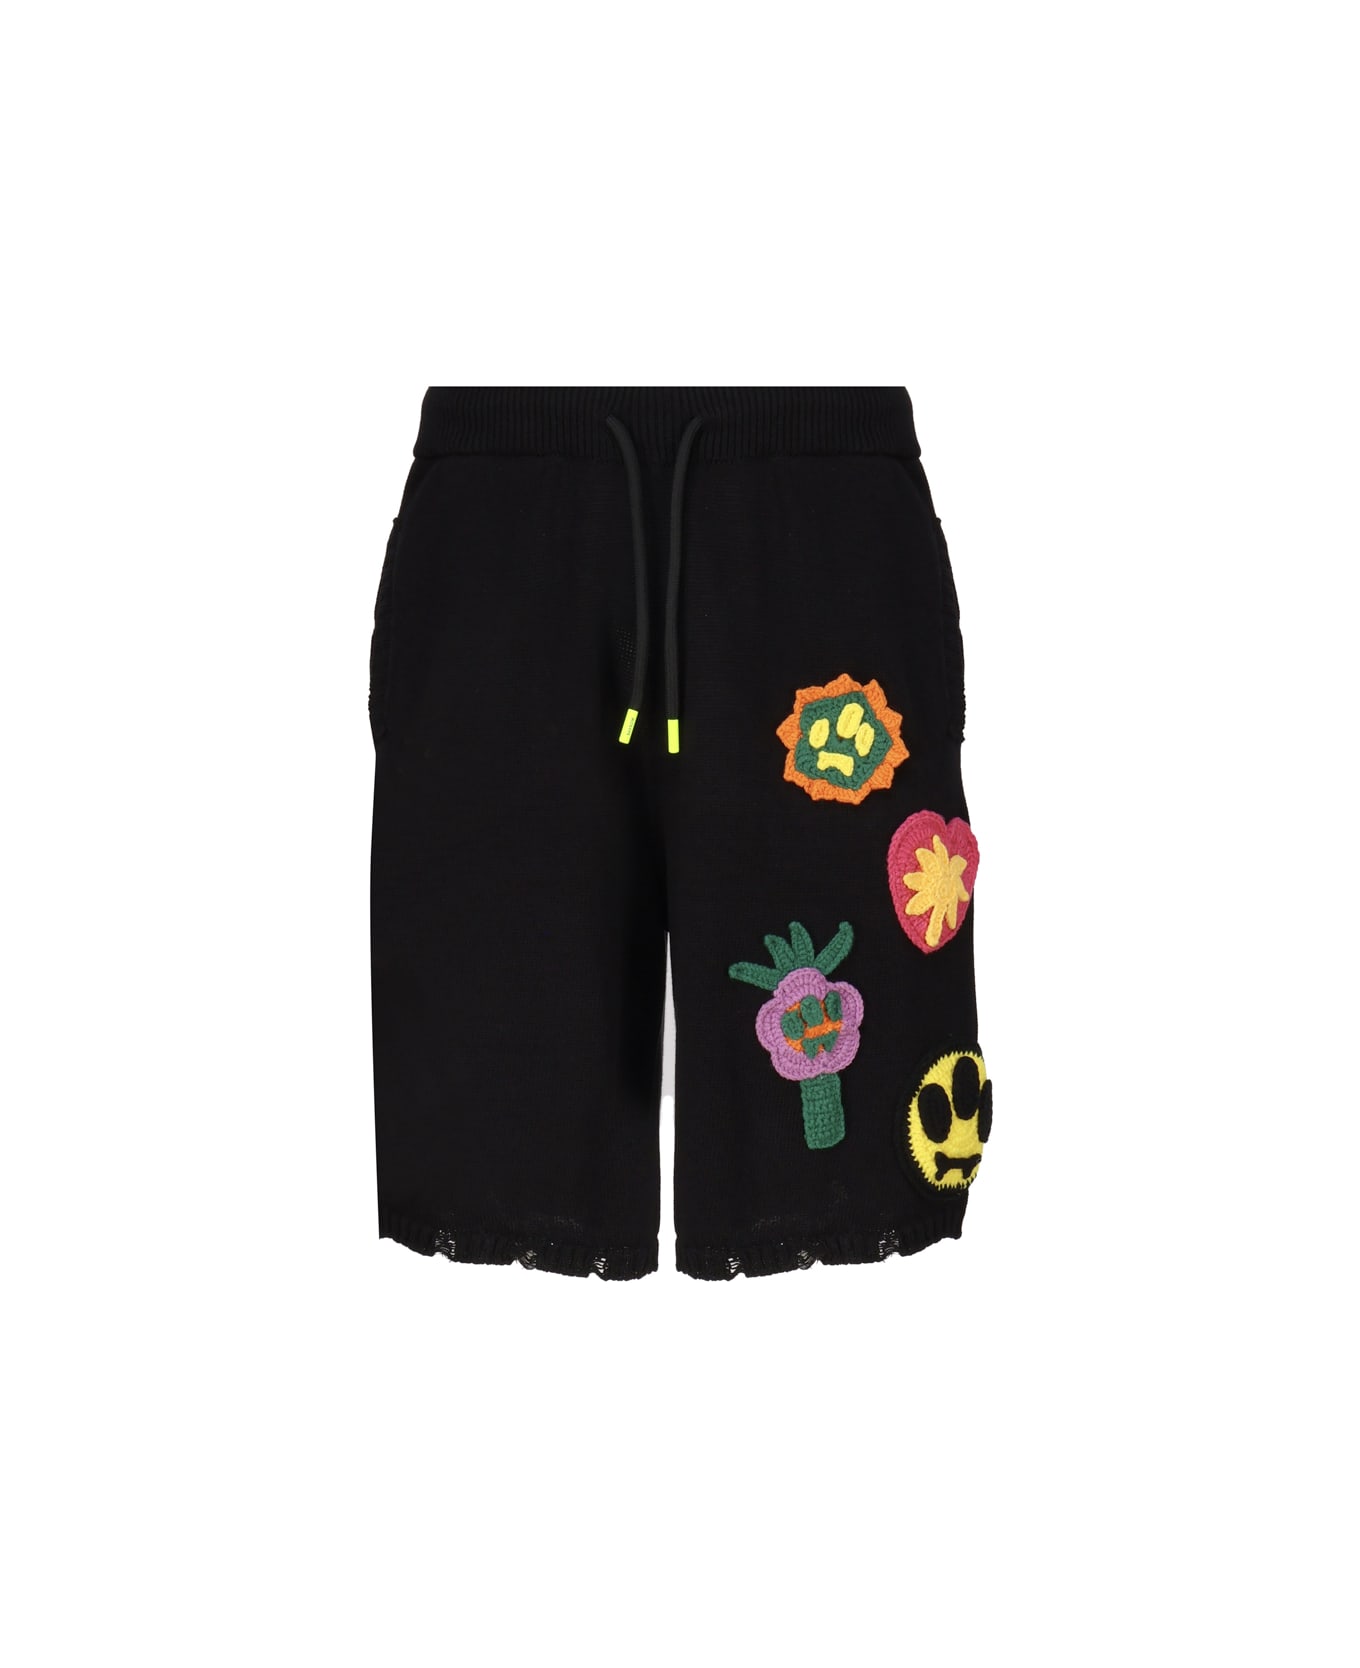 Barrow Bermuda Shorts With Patches - Nero